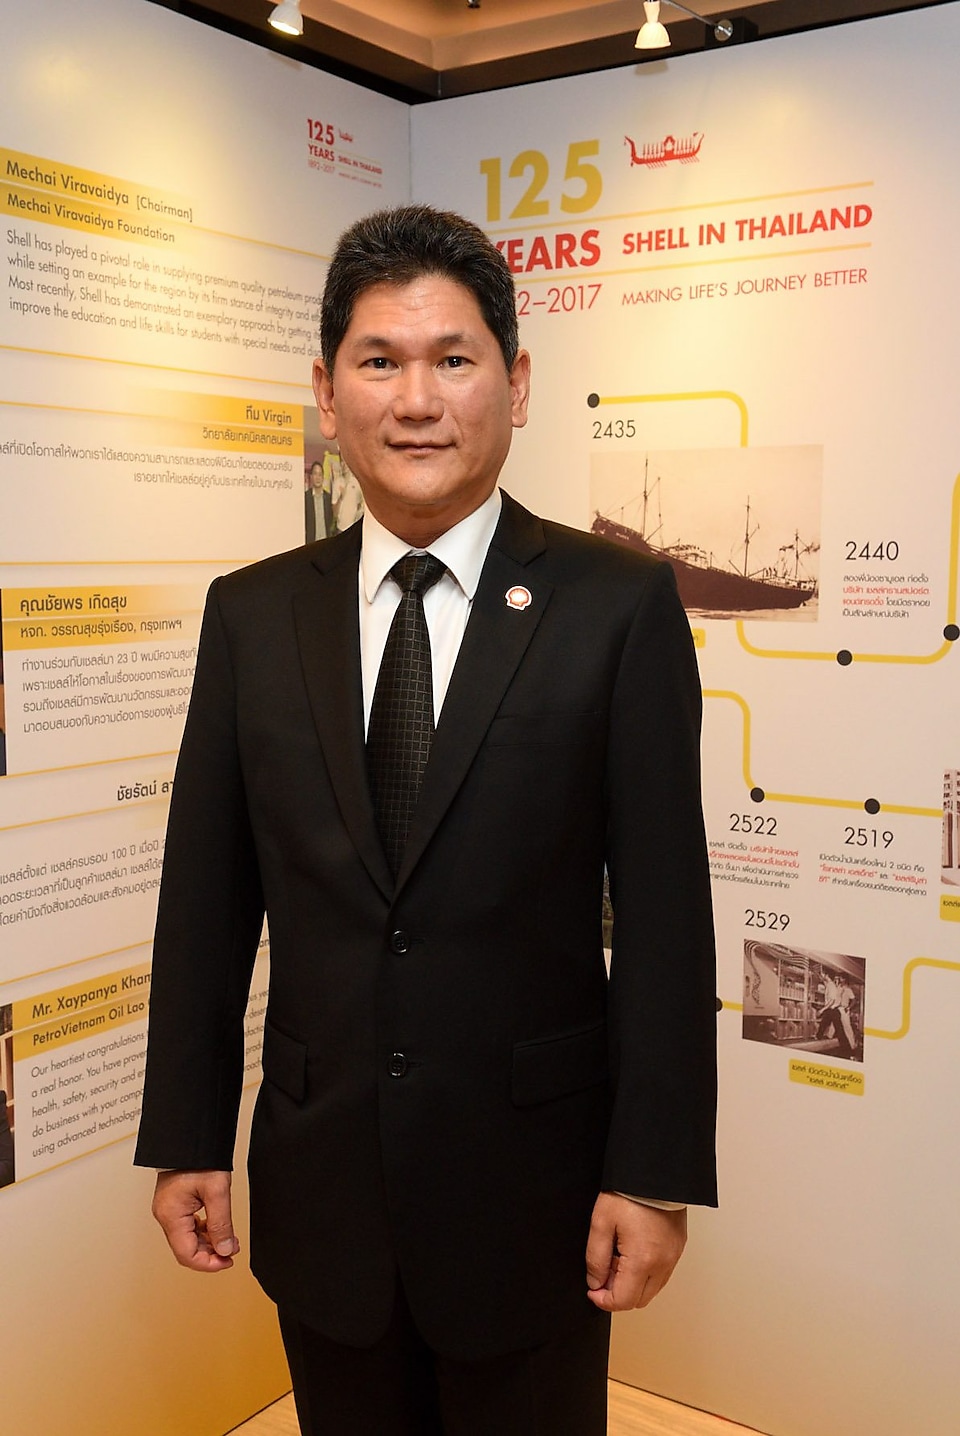 Mr. Asada Harinsuit, Country Chairman and Vice President of Retail Business East, Shell Company of Thailand Limited